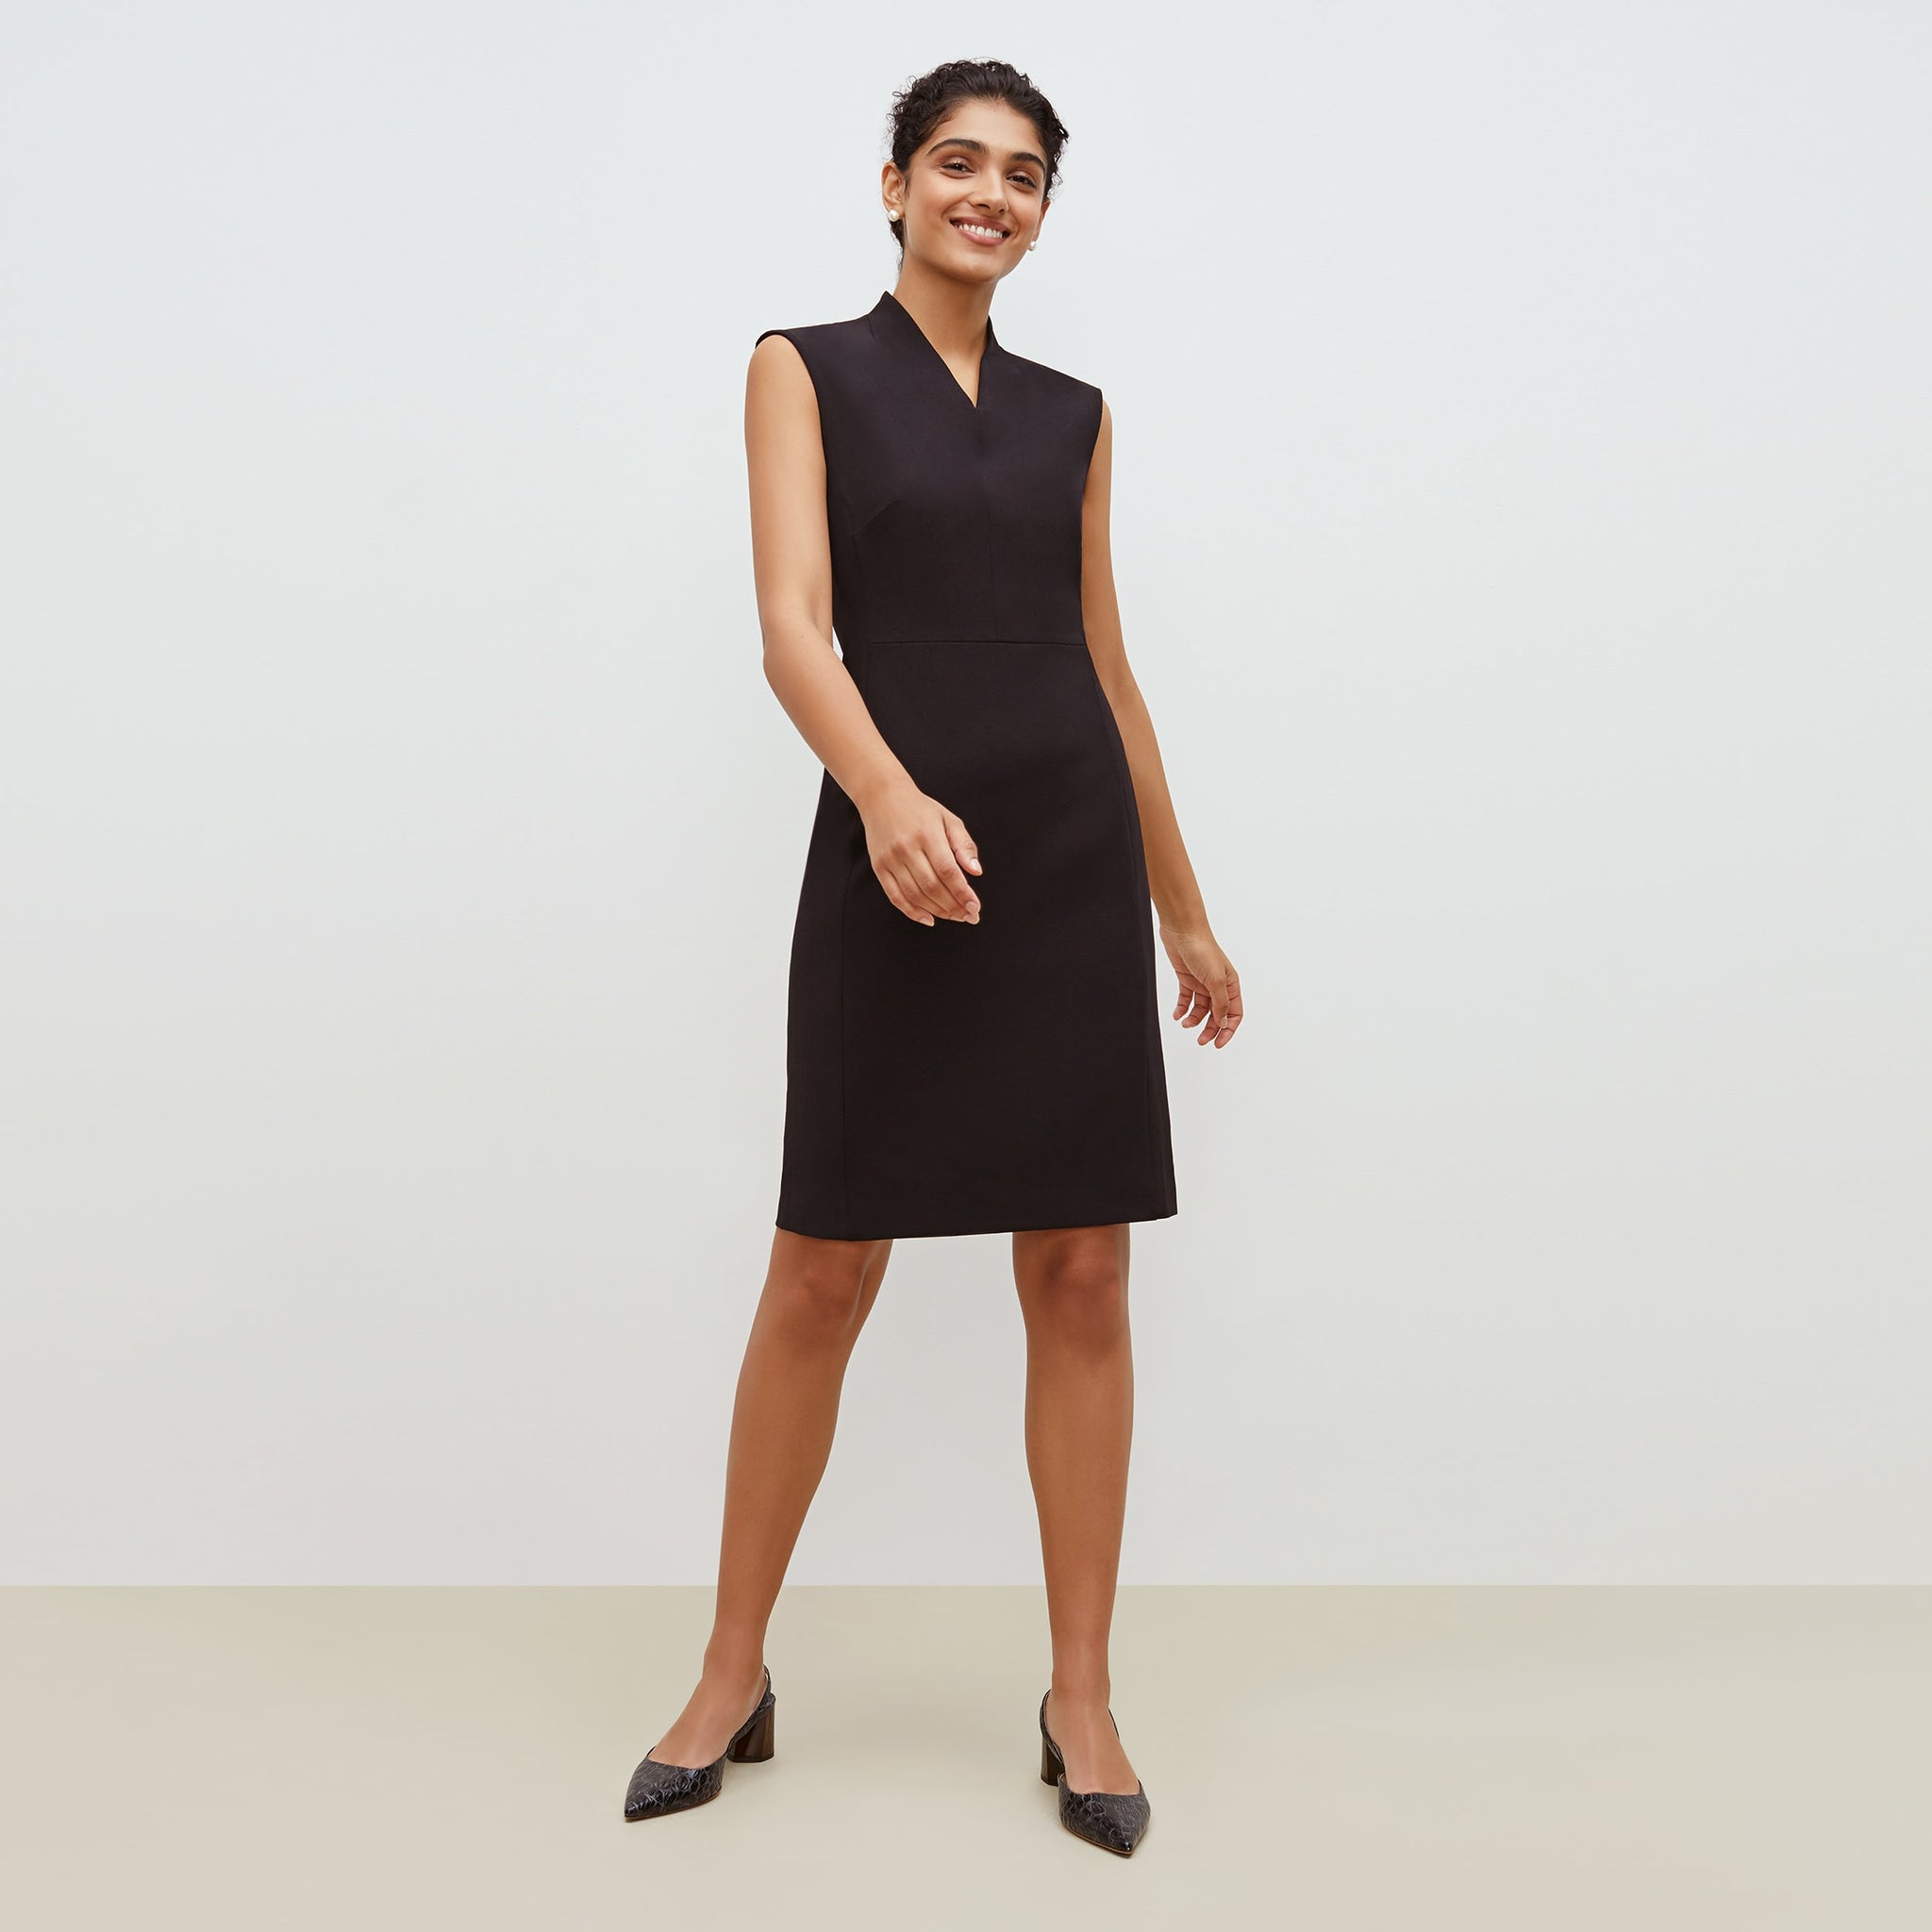 Front image of a woman standing wearing the Aditi dress in black